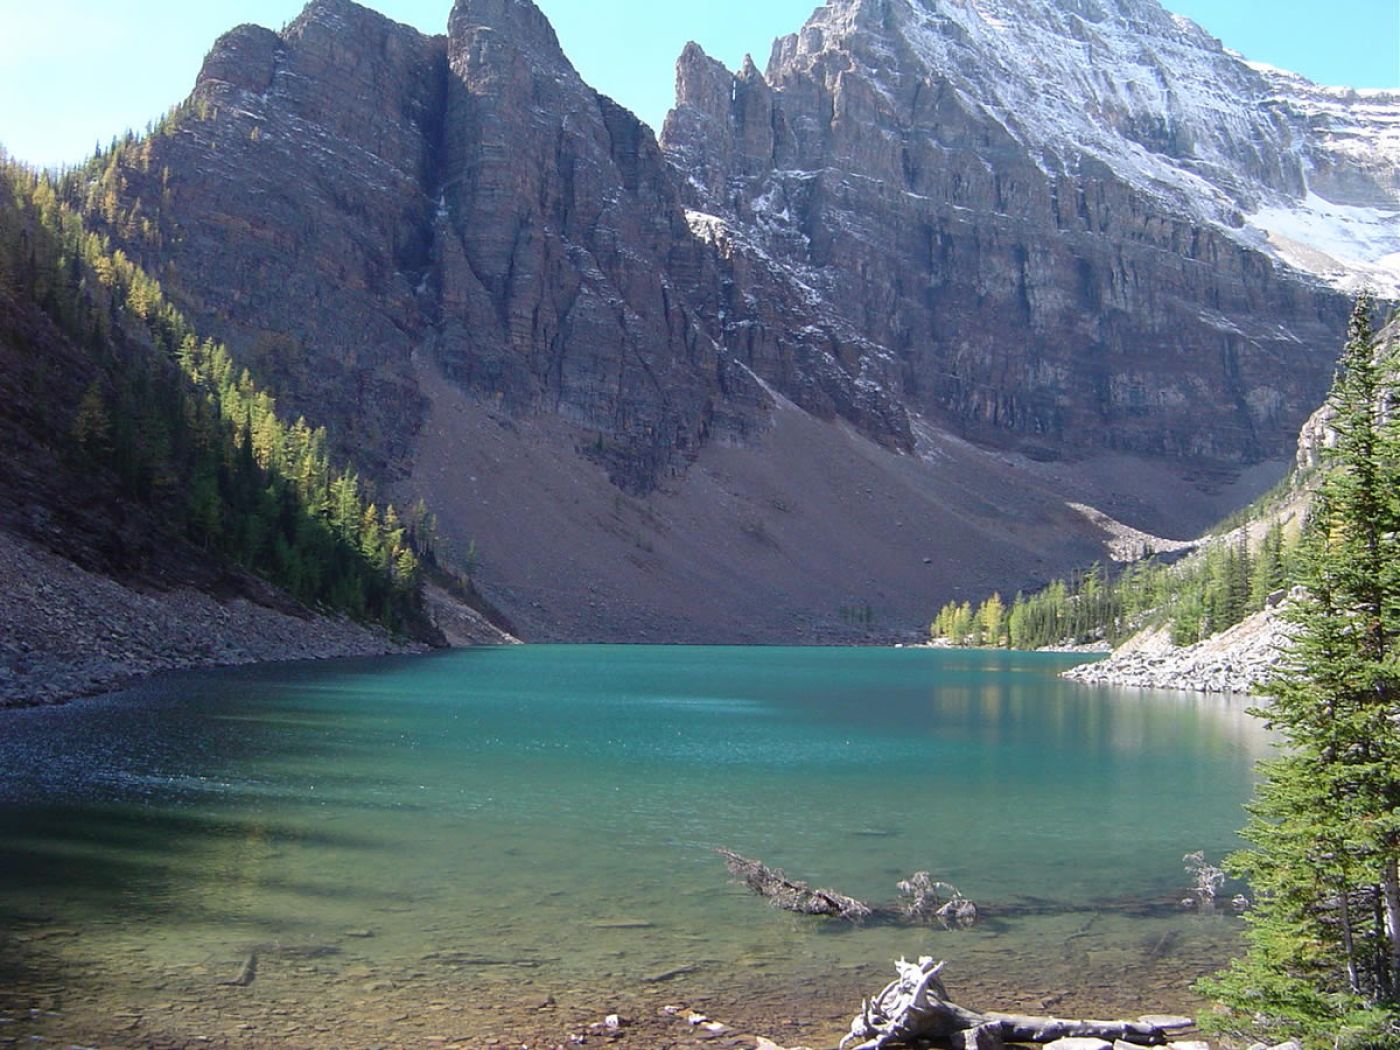 lake agnes in the rockies of banff national park | lake agnes in den rockies vom banff nationalpark